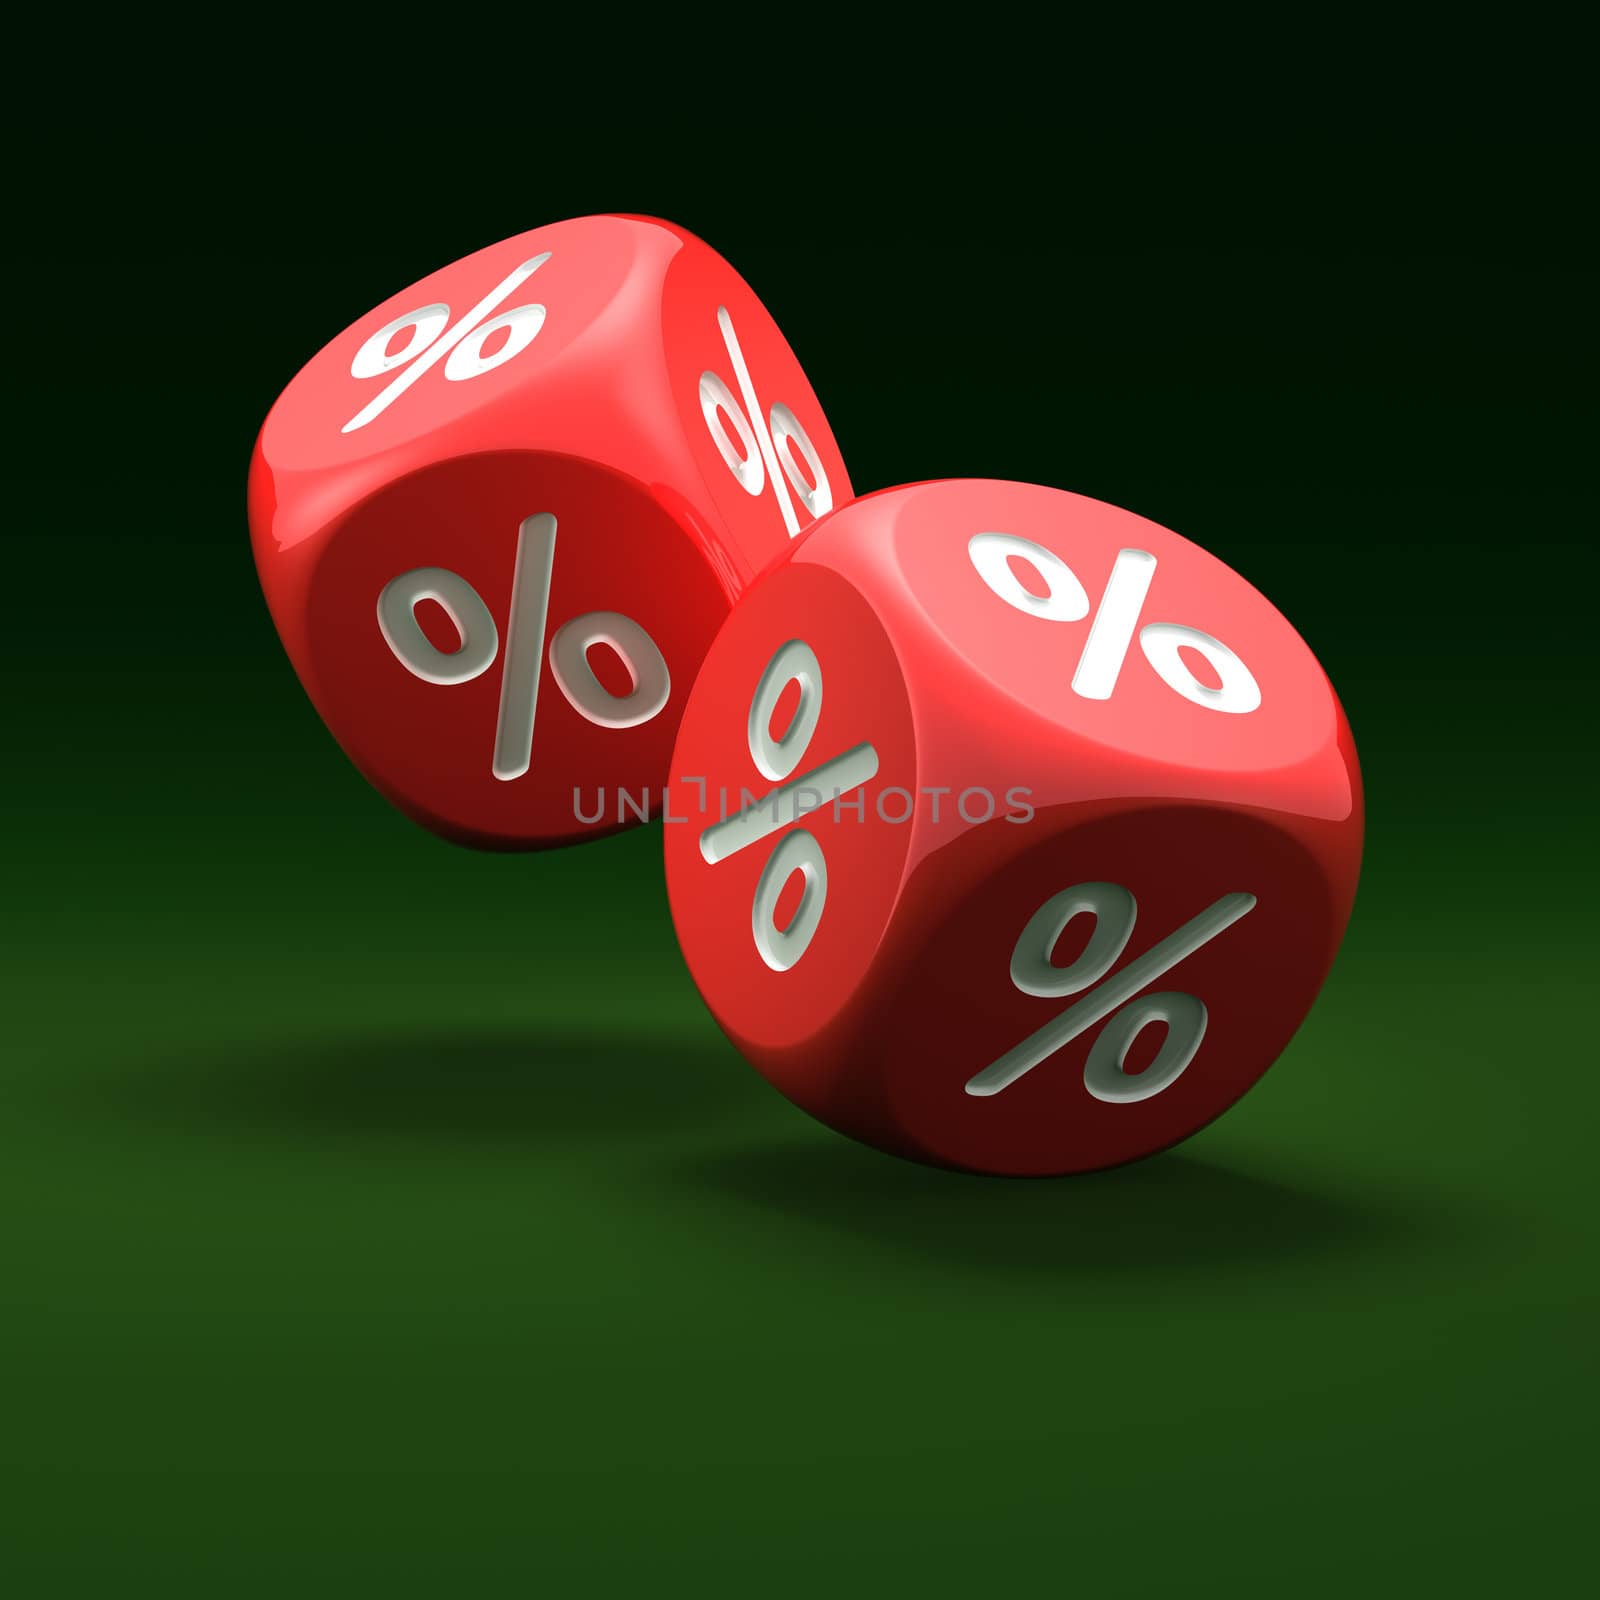 Percent sign on the dice by timbrk